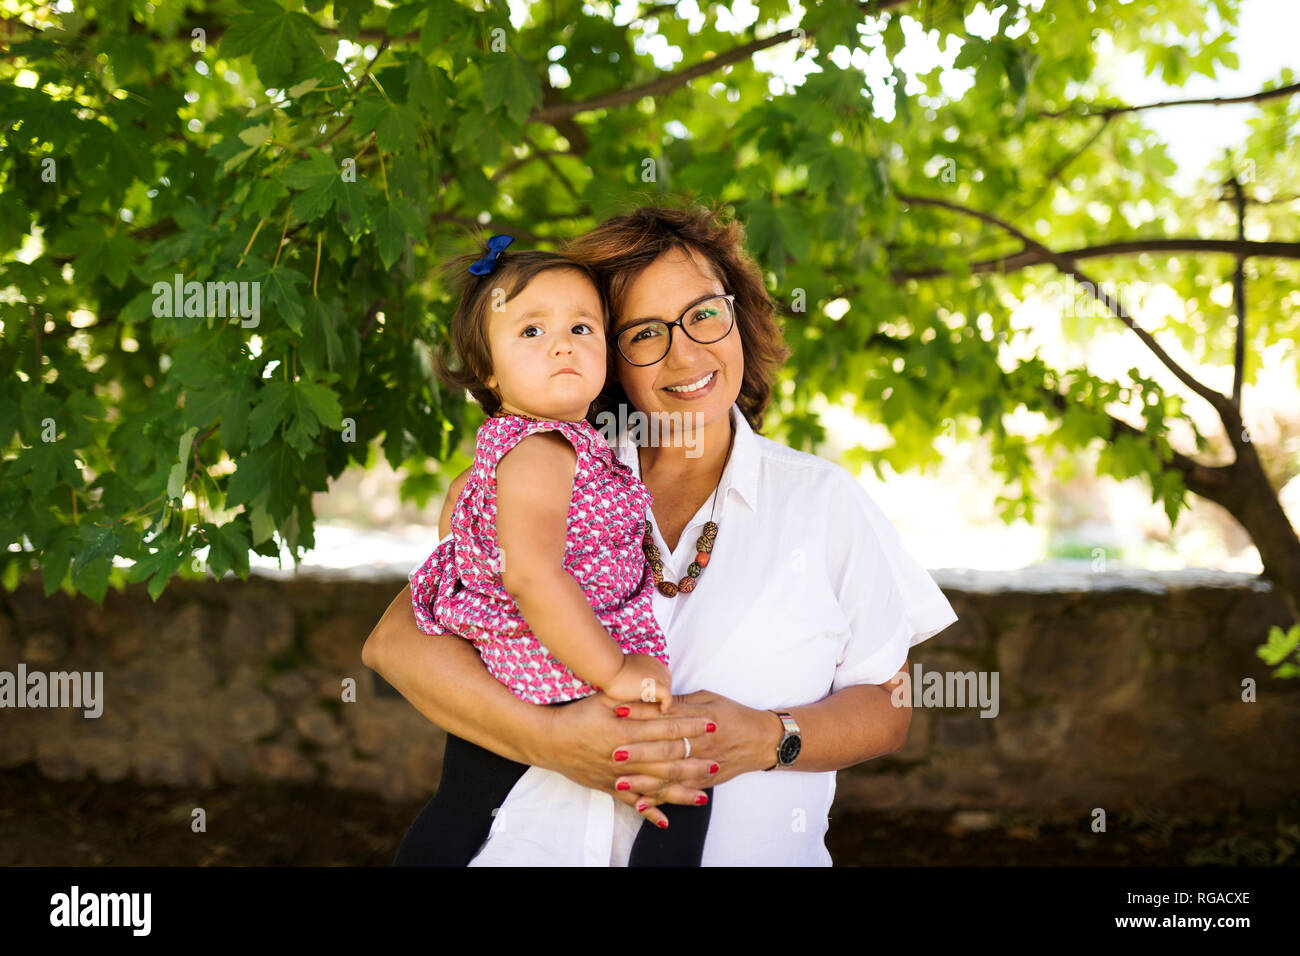 Portrait of smiling mature woman with baby girl Stock Photo